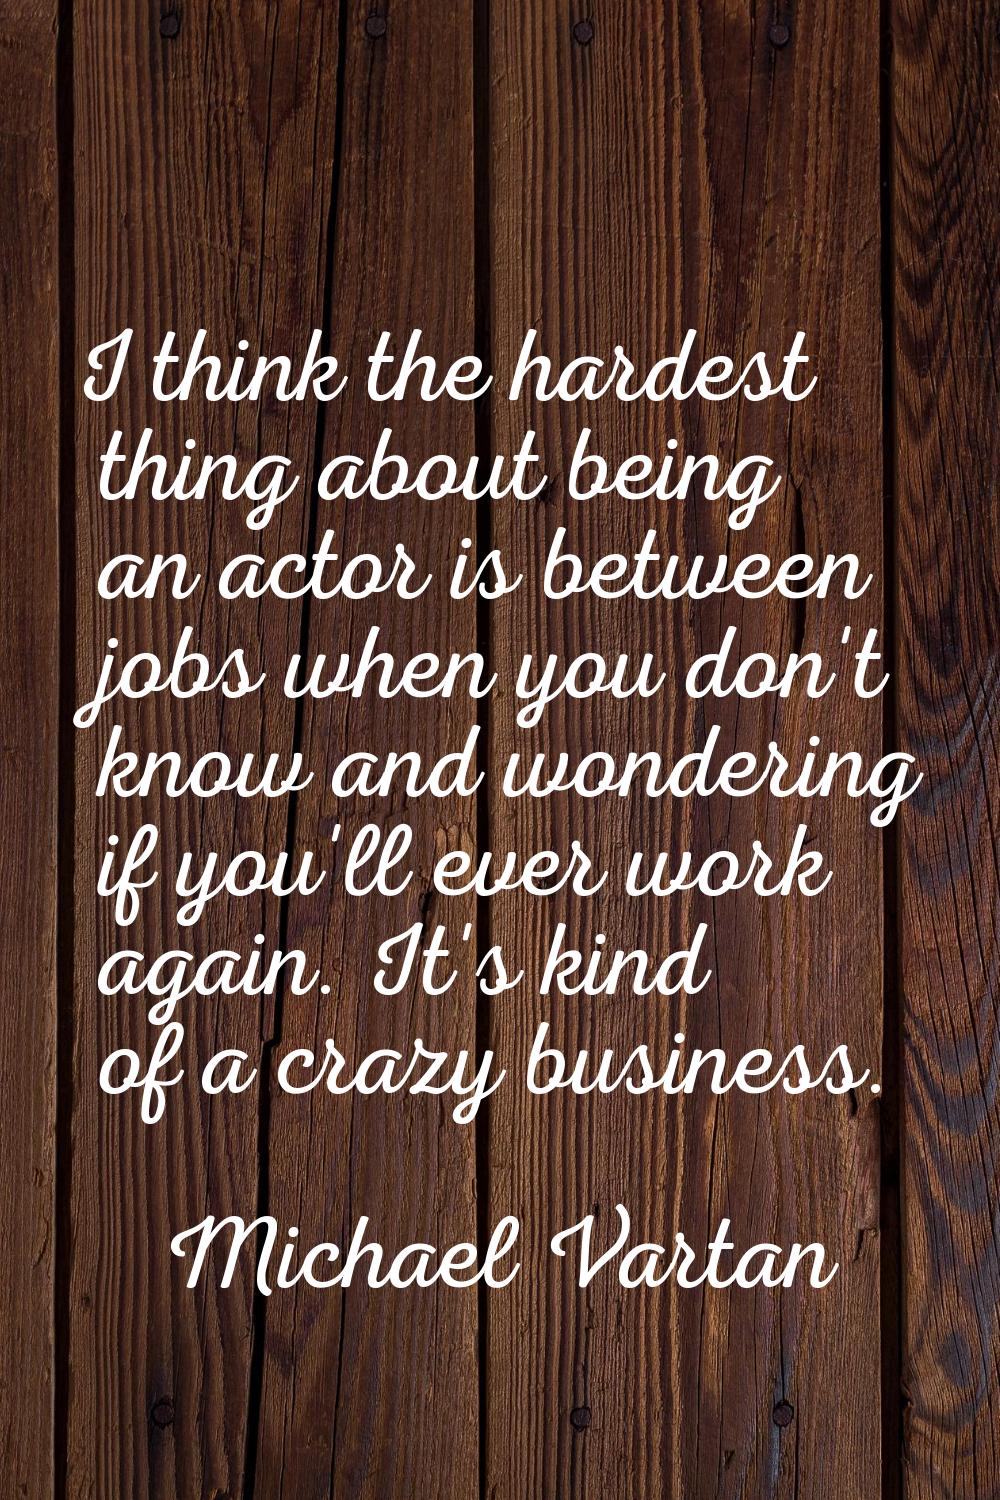 I think the hardest thing about being an actor is between jobs when you don't know and wondering if